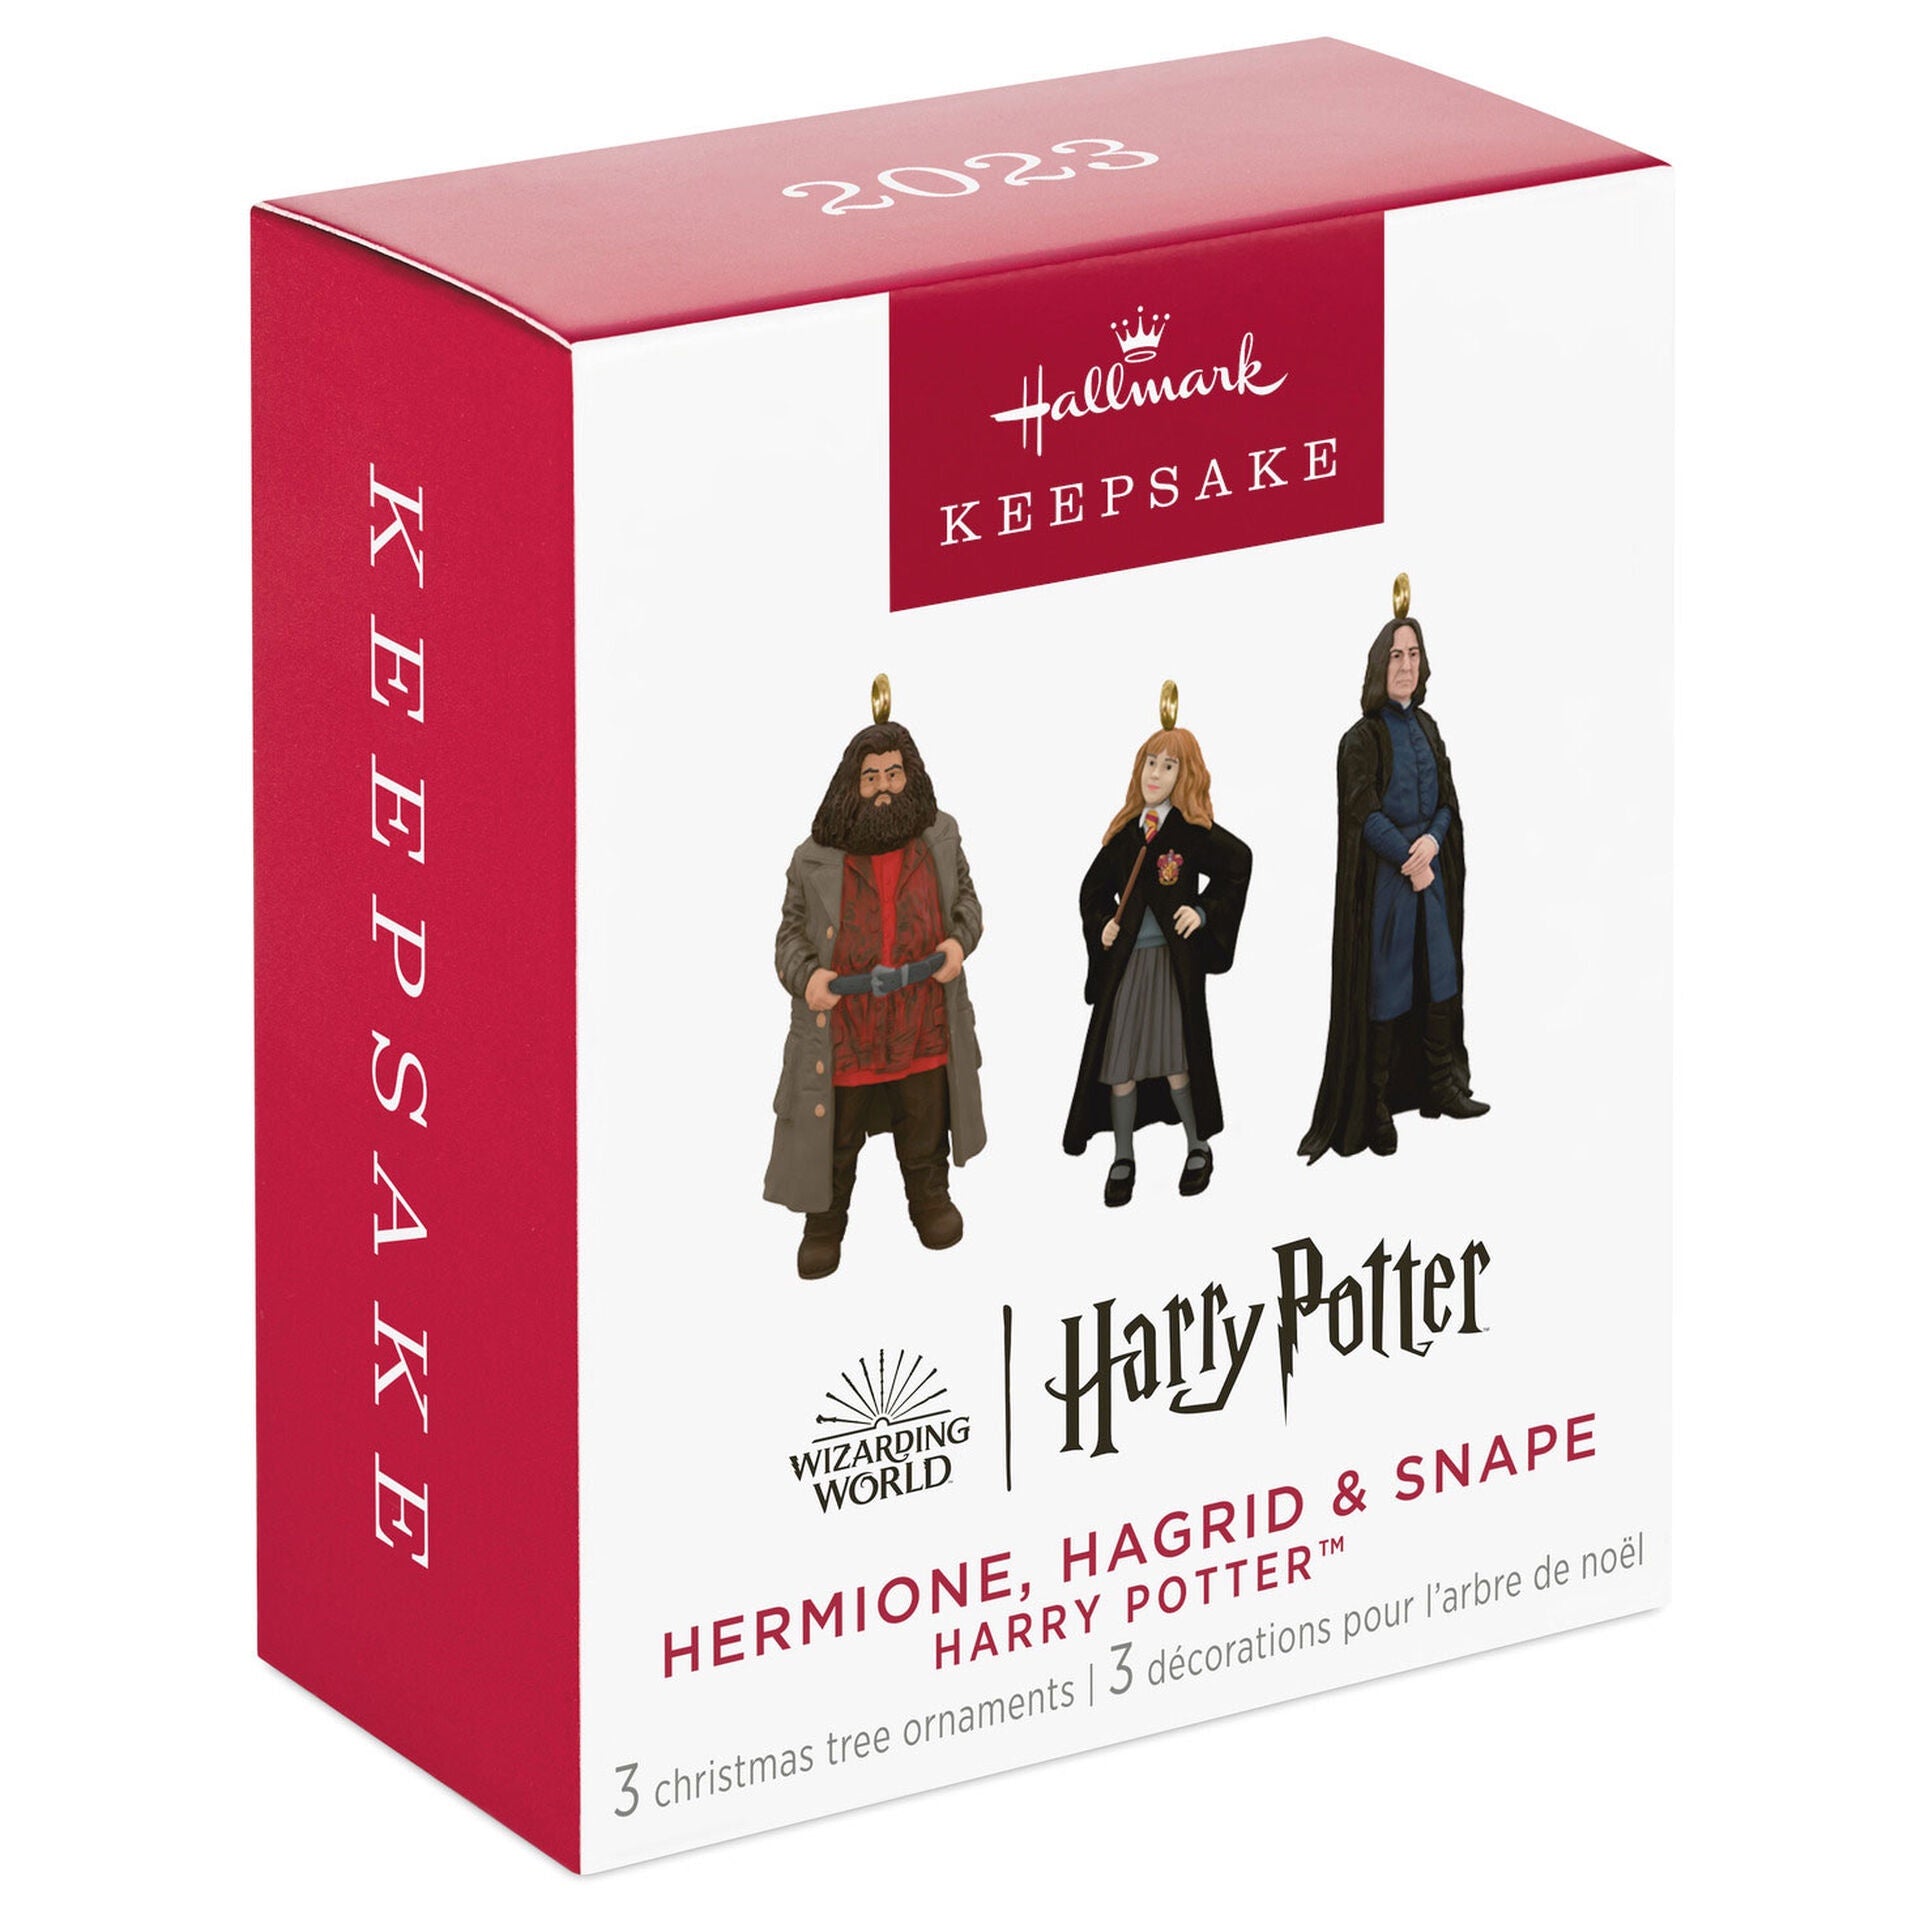 Mini Harry Potter™ Hermione™, Hagrid™ and Snape™ Metal Ornaments, Set of 3